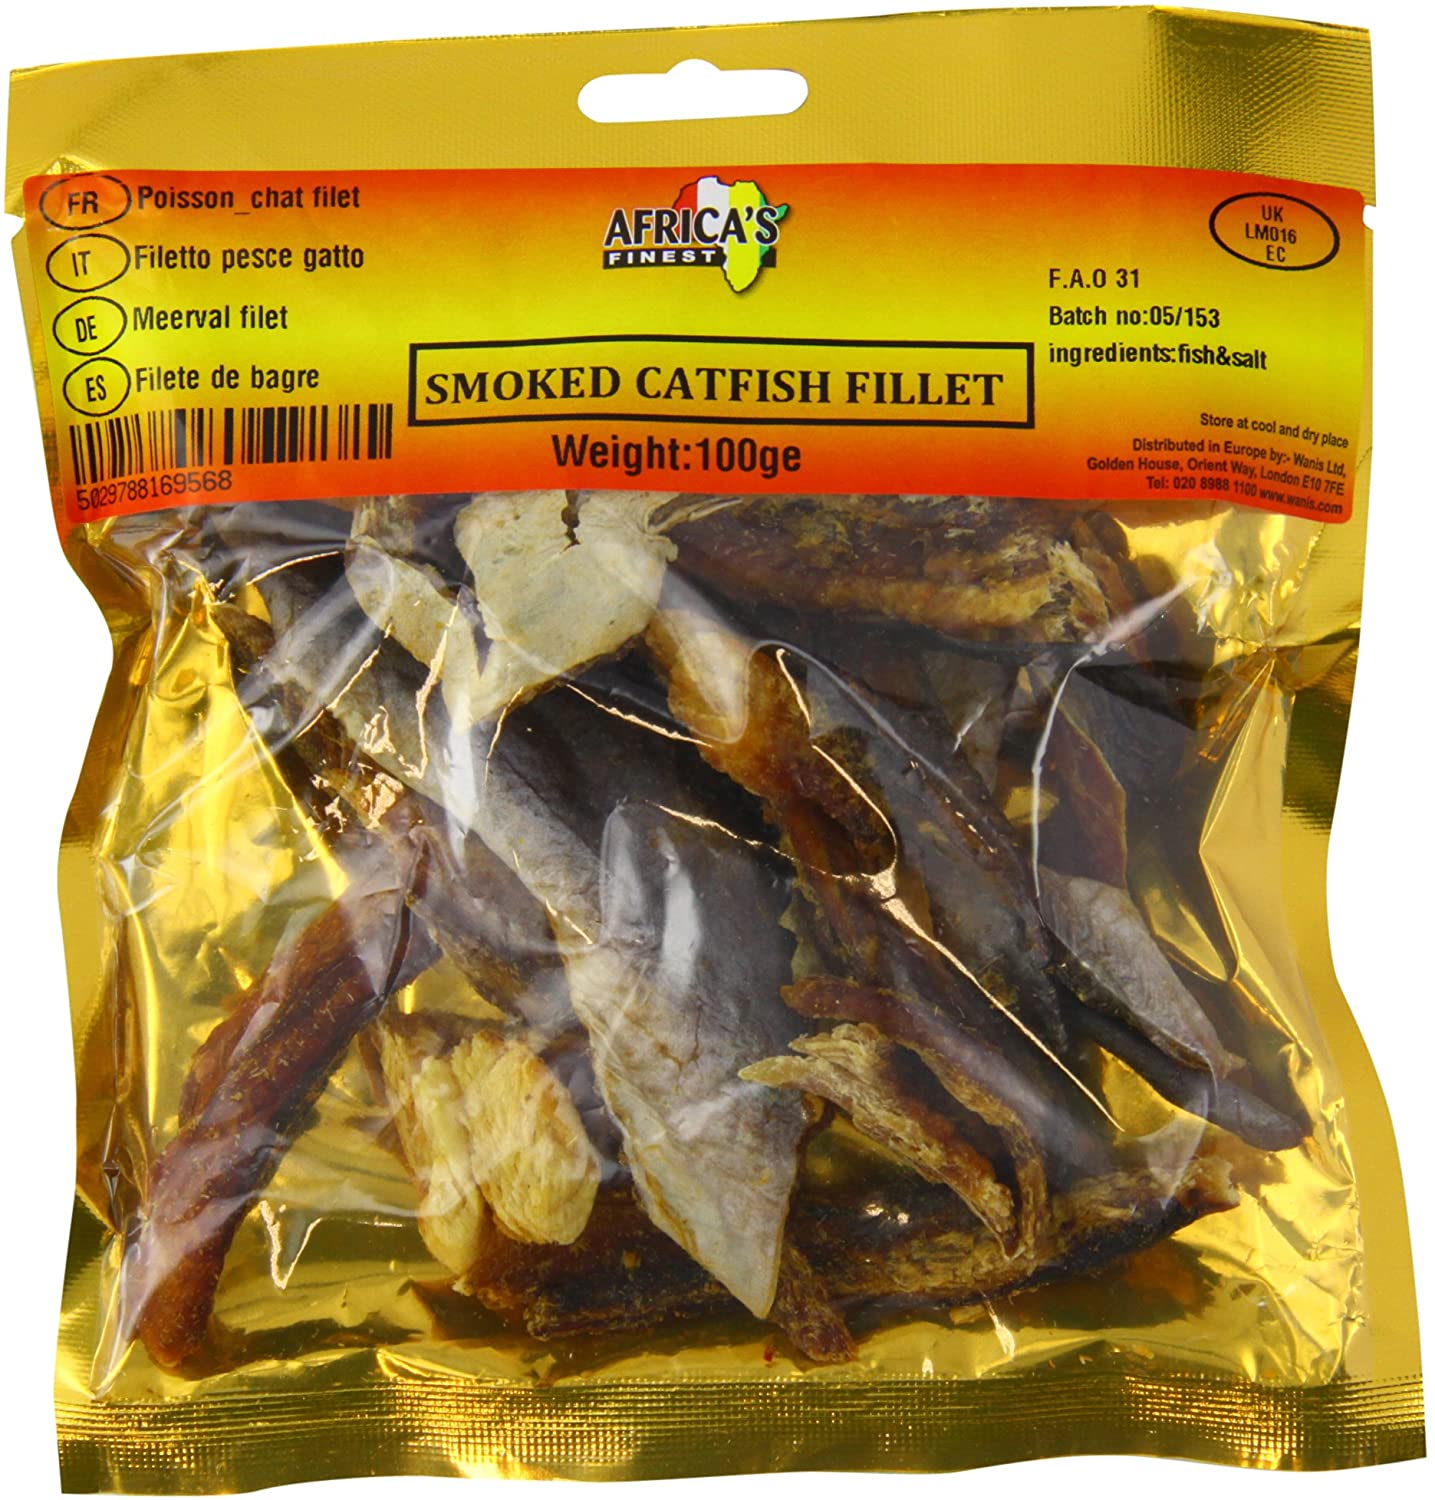 Africa’s Finest Smoked Catfish Fillet 100g